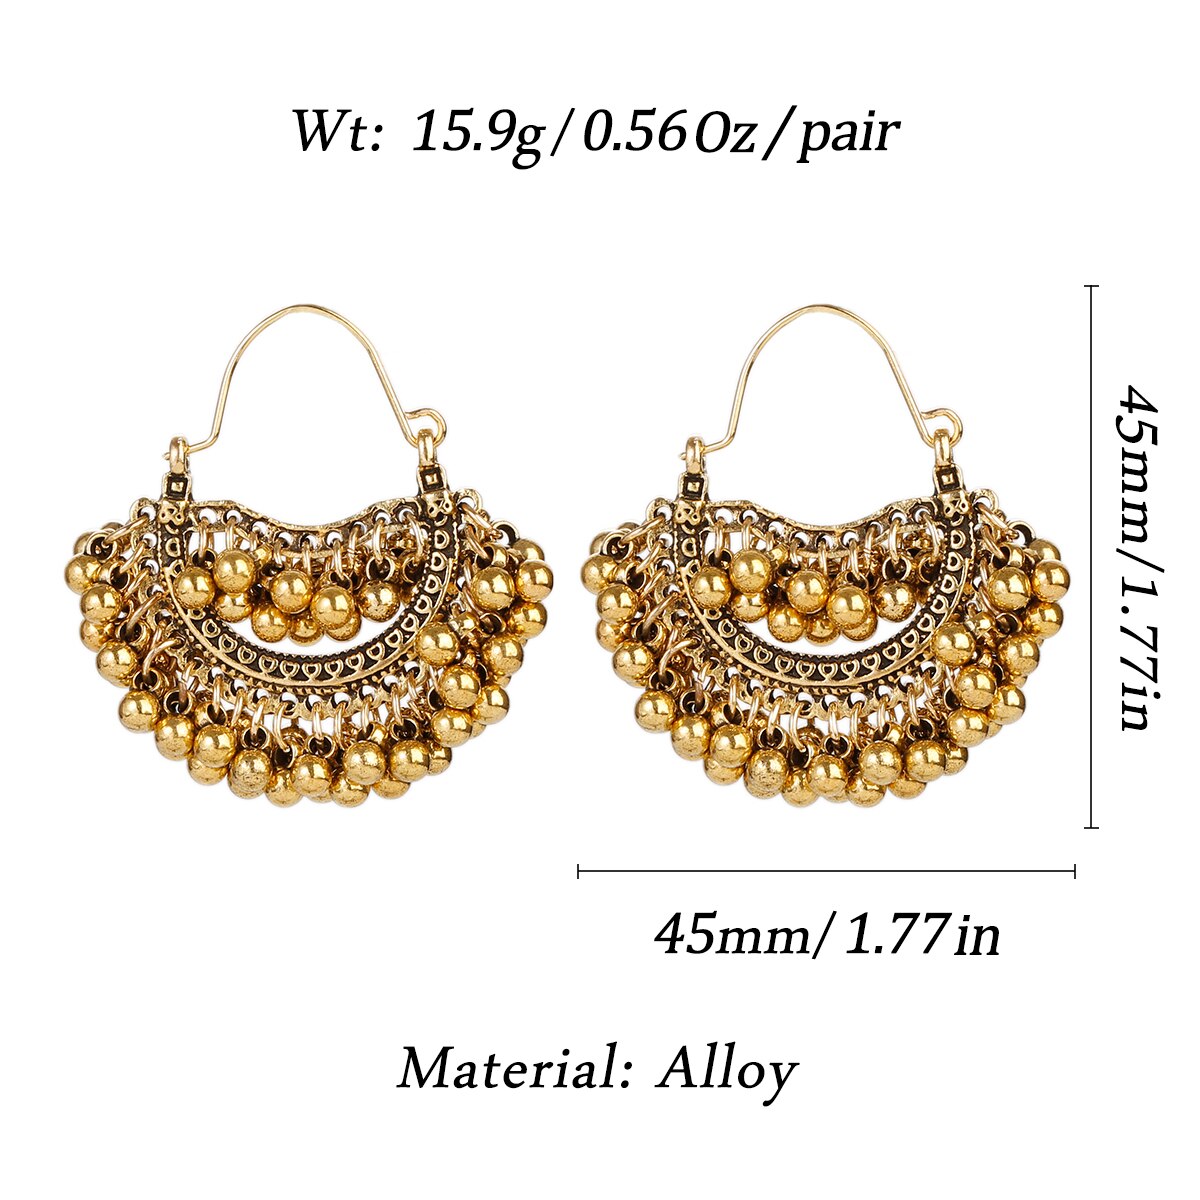 Vintage-Retro-Gold-Color-Alloy-Sector-Bollywood-Oxidized-Earrings-For-Women-Boho-Ethnic-Beads-Tassel-3256803500504418-6